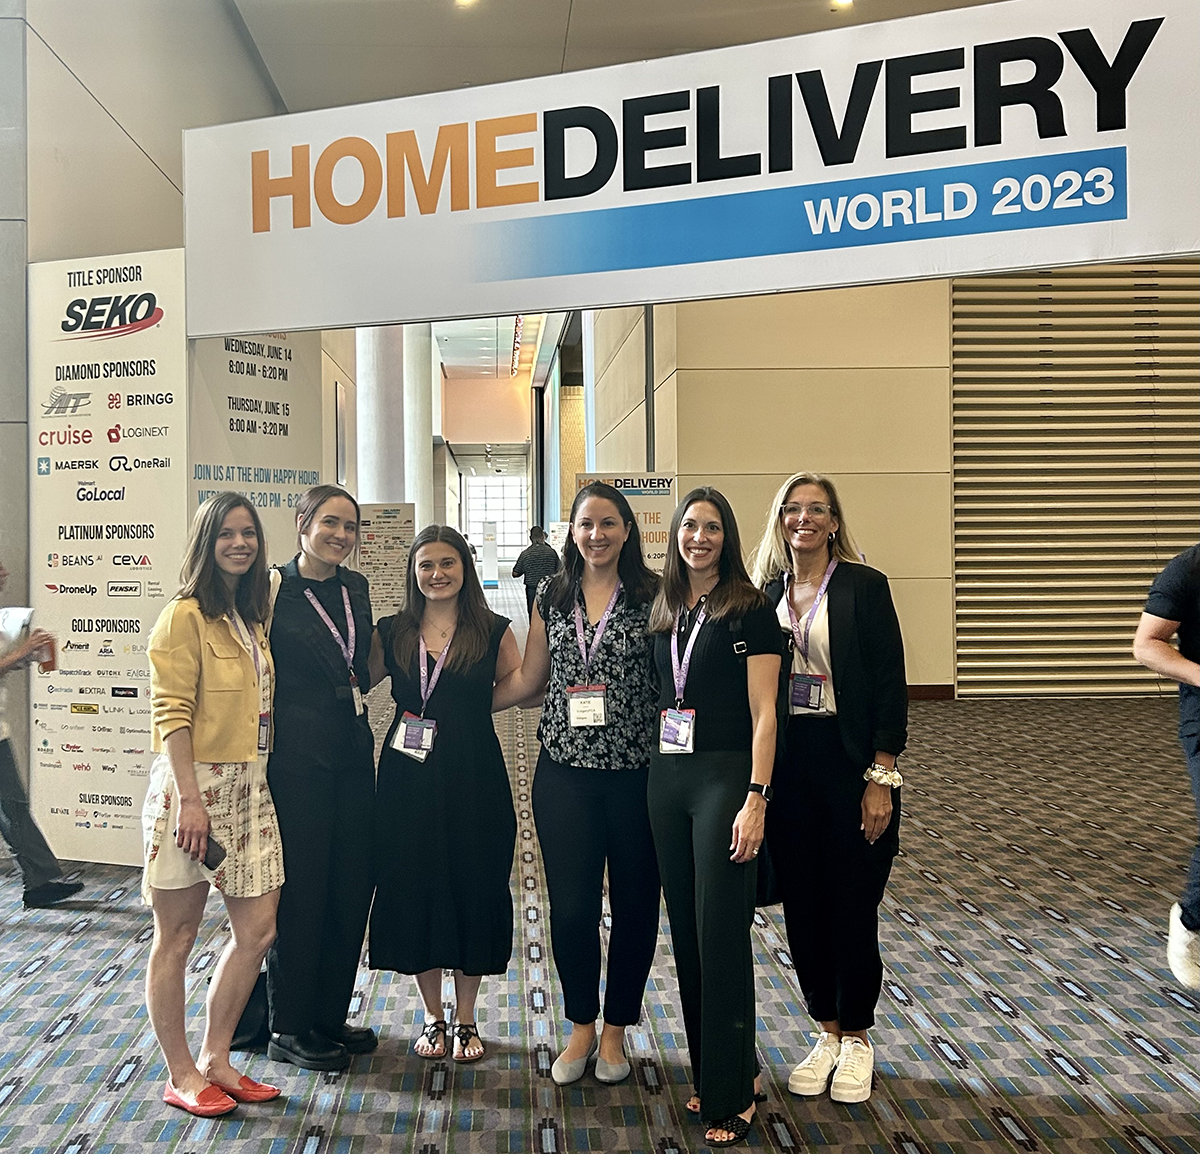 Home Delivery World 2023: PR Takeaways from Philly’s Premier Supply Chain & Logistics Conference